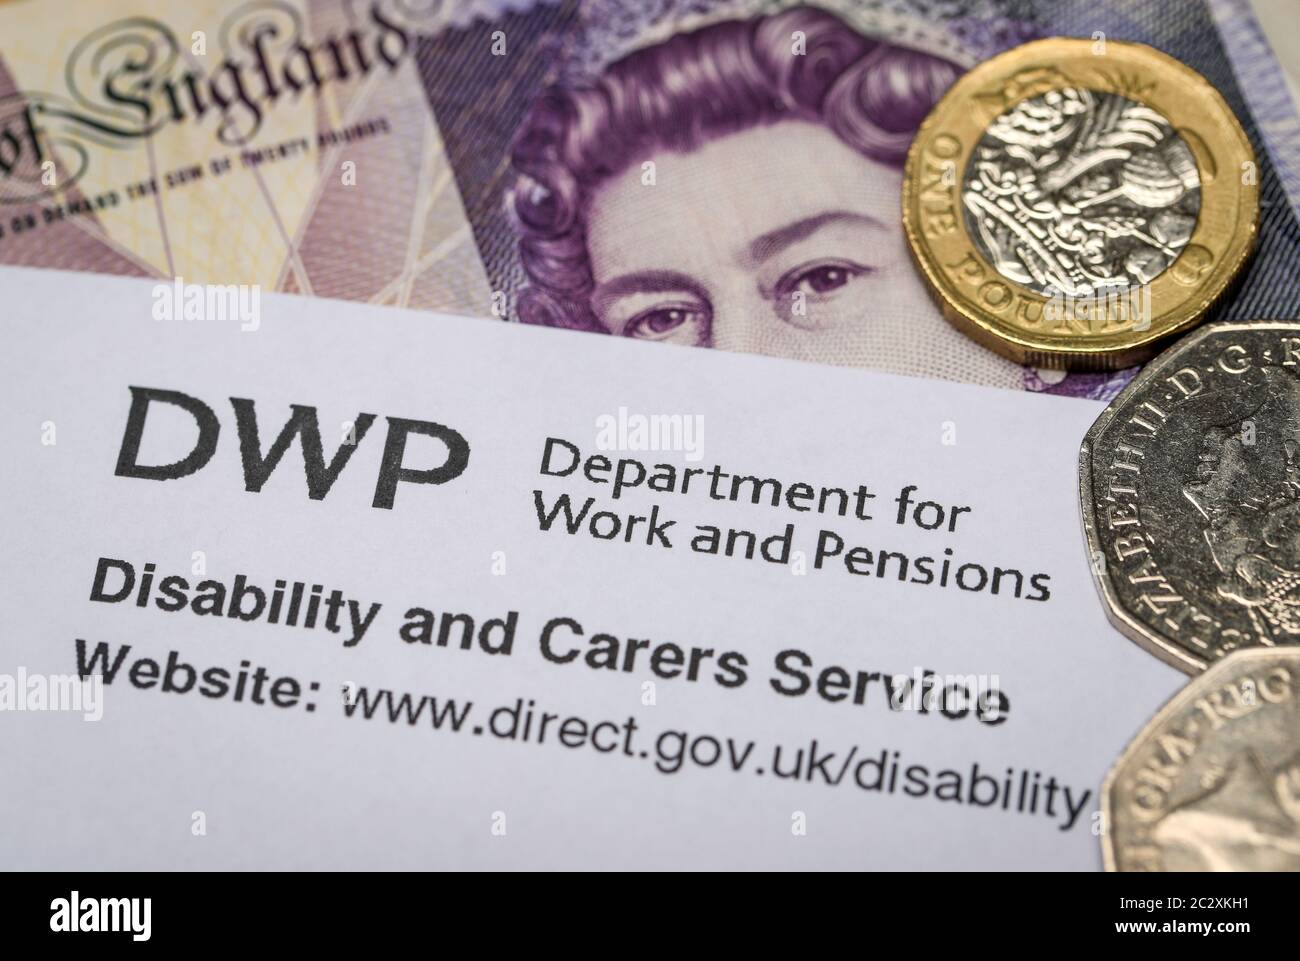 DWP Department for Work and Pensions Brief mit UK Währung Stockfoto